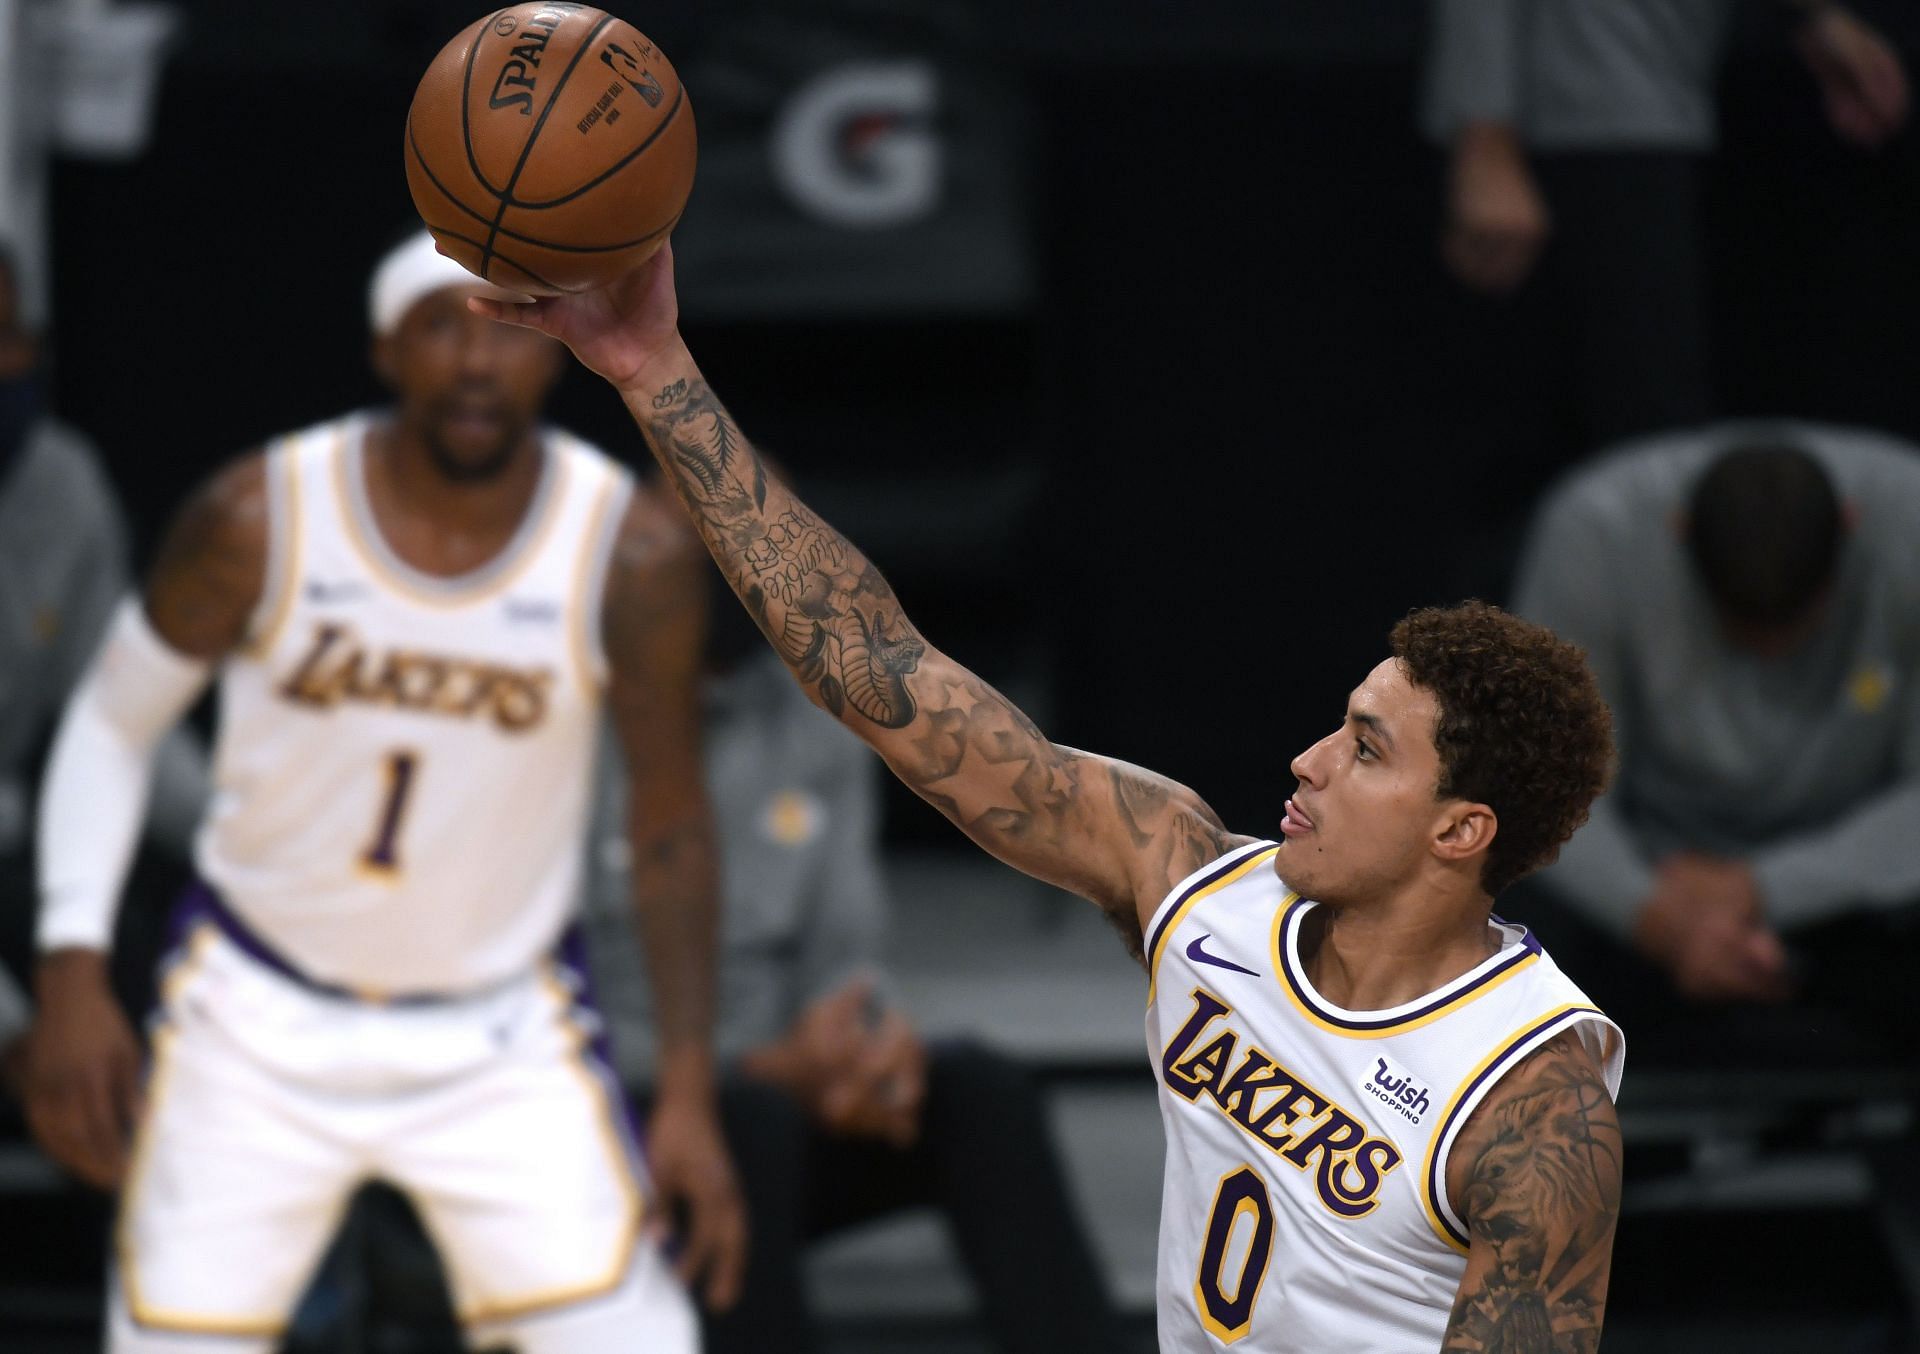 Lakers' forward Kyle Kuzma still believes he can become an All